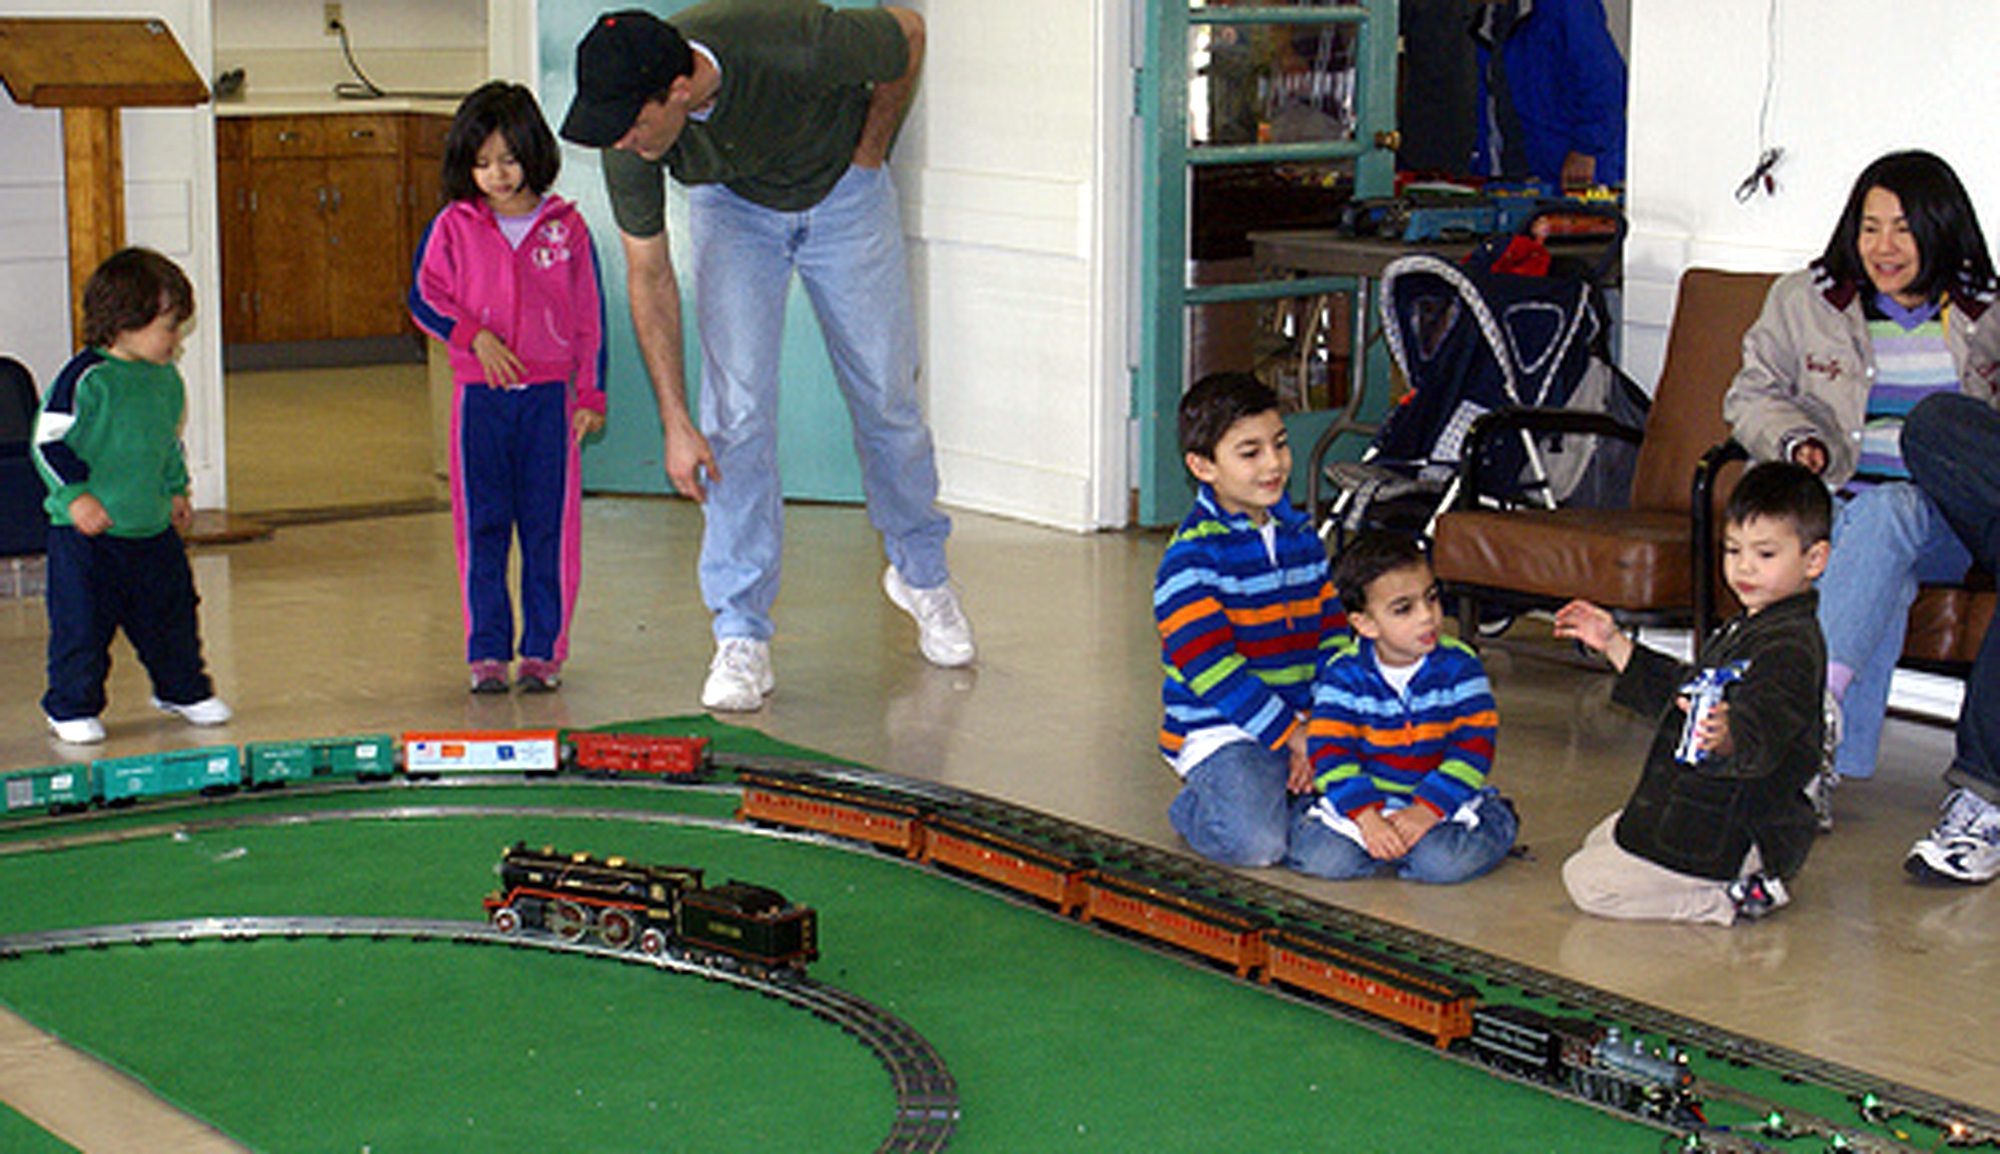 Kids enjoying the operating layout at the February 2008 meet